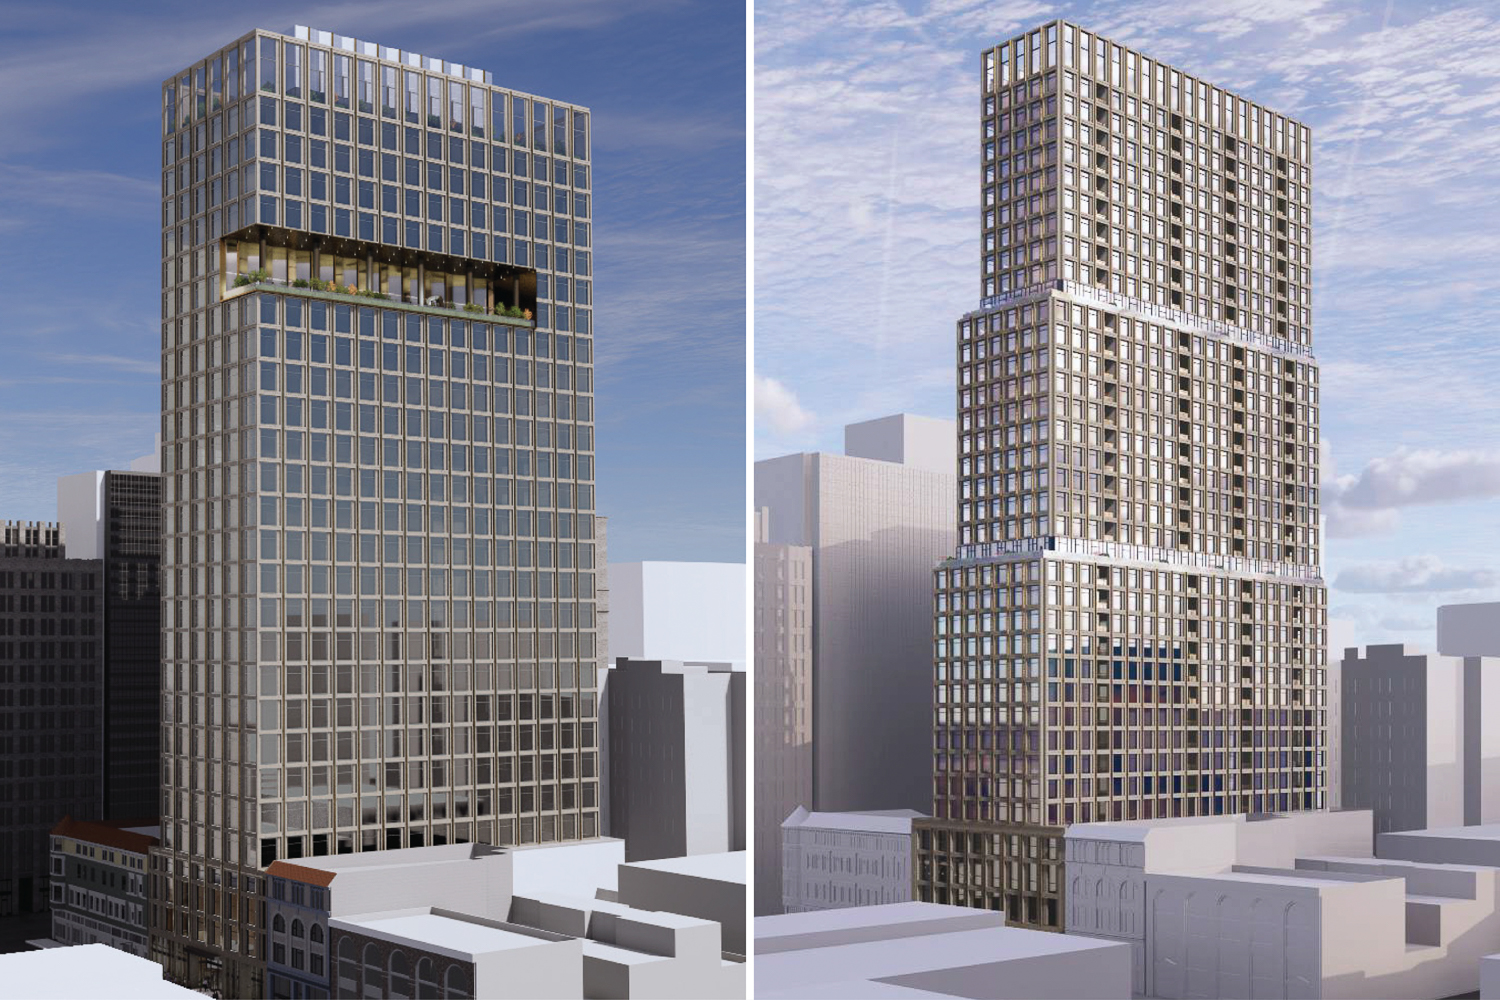 1431 Franklin Street proposal for an Office option (left) or Residential Option (right), rendering by Large Architecture